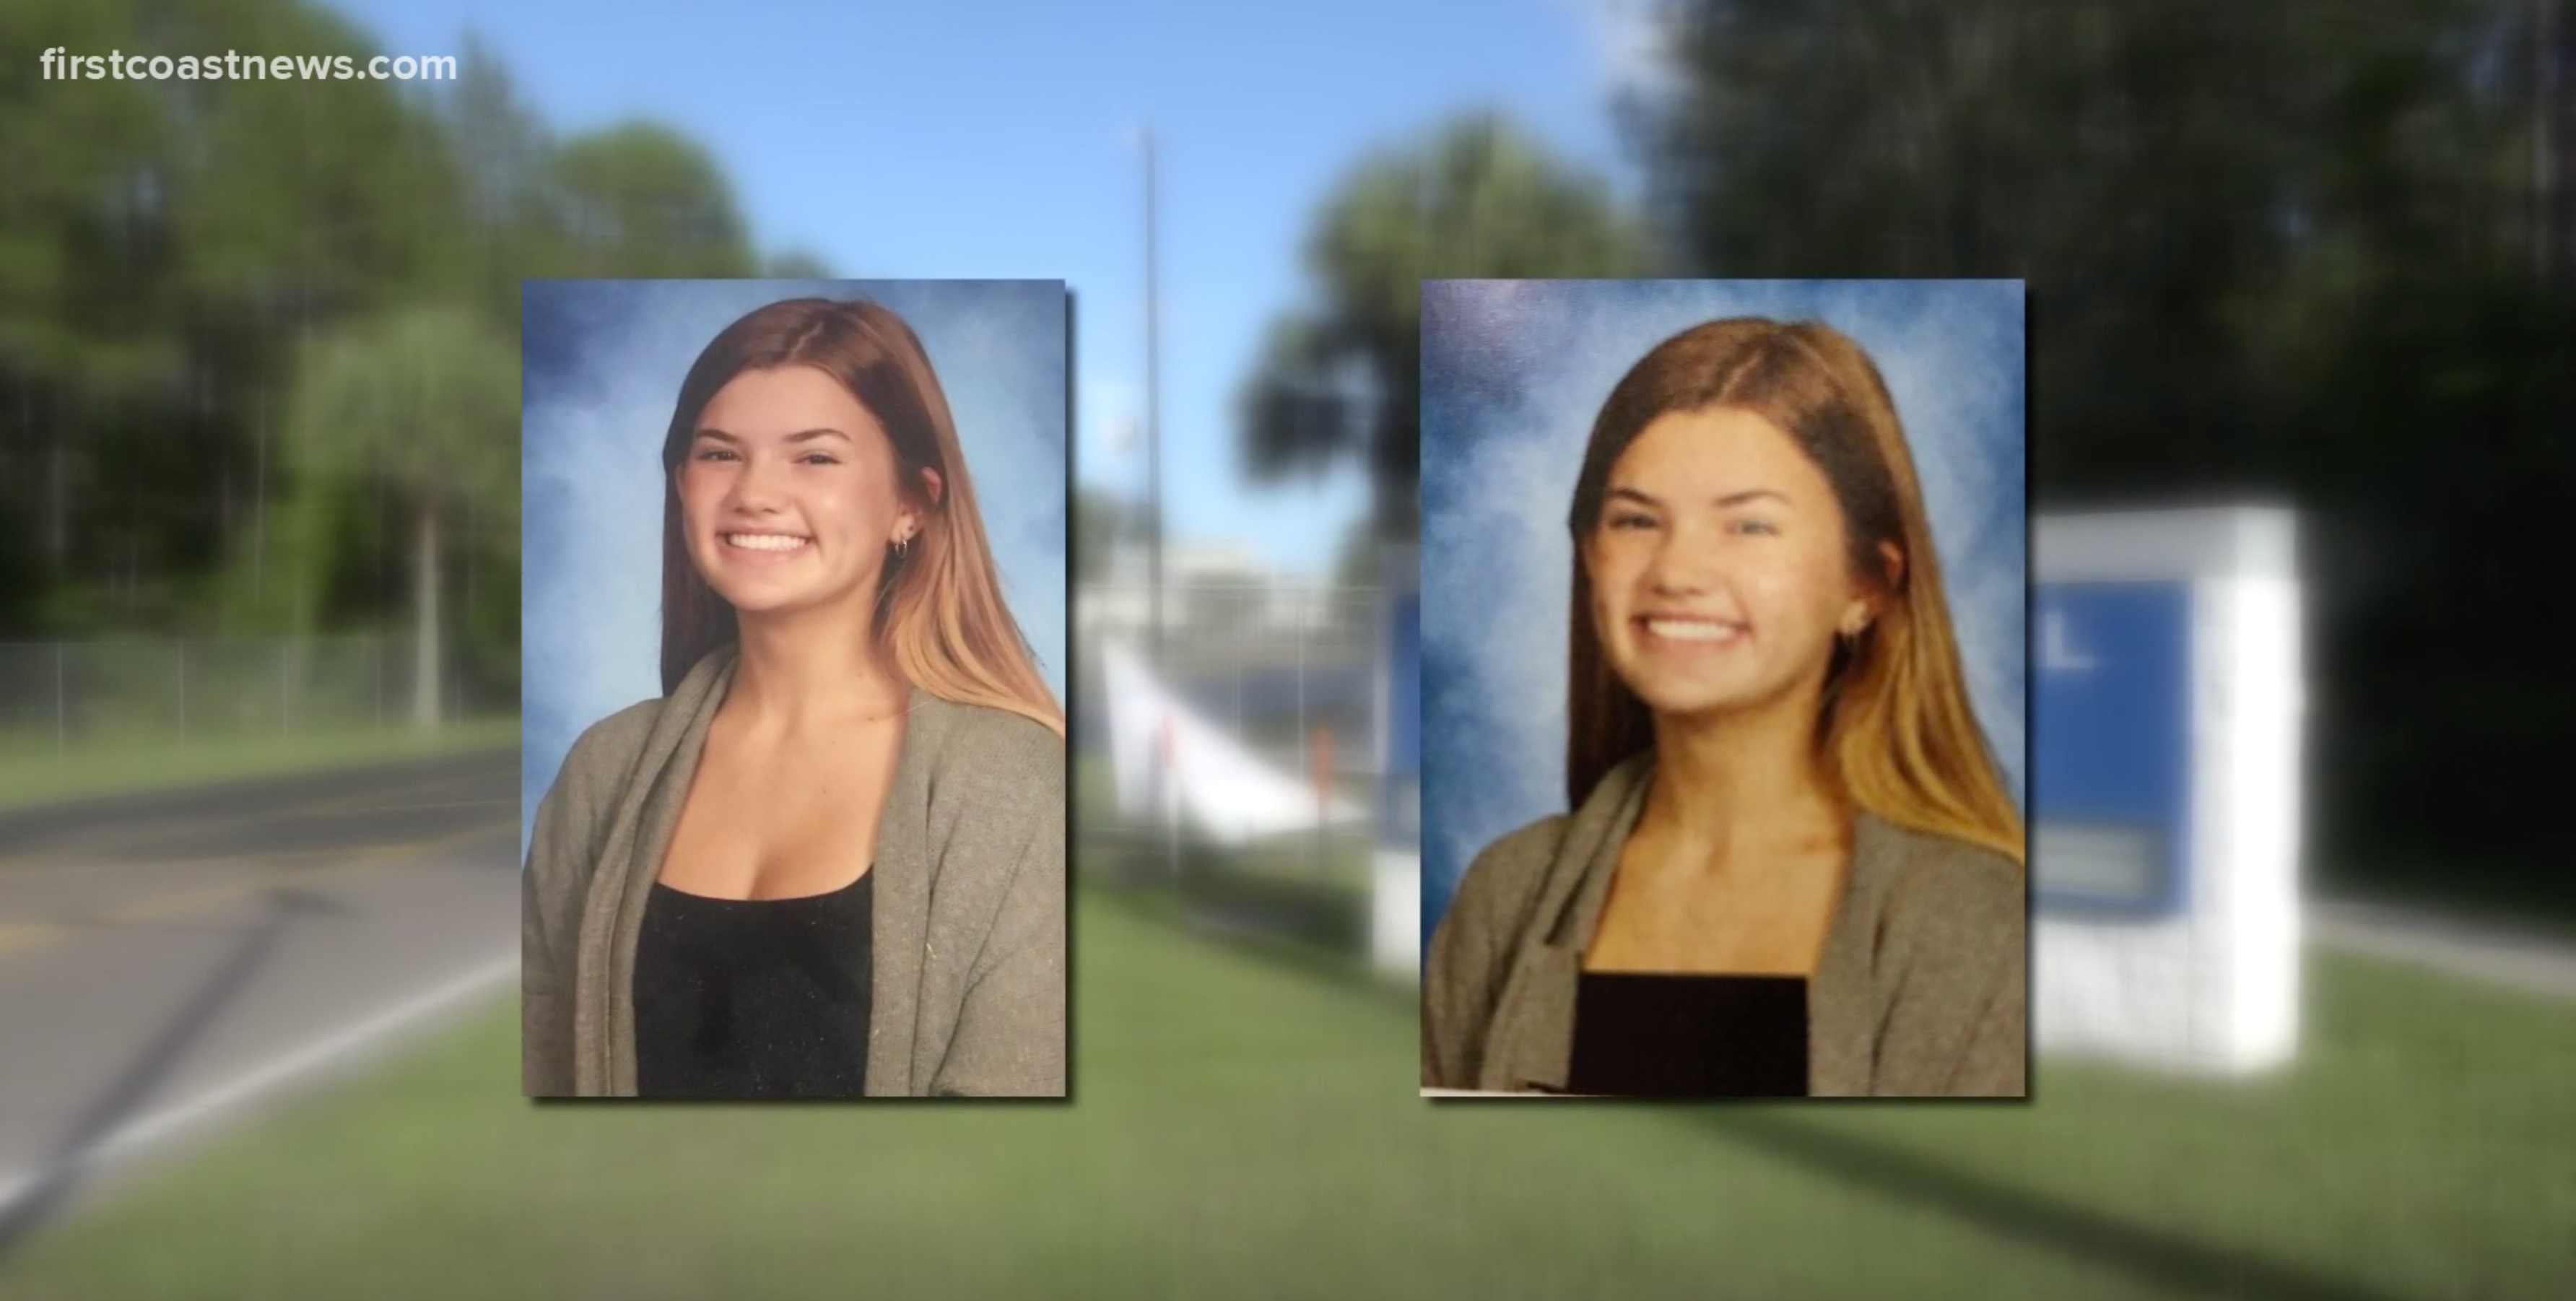 Bartram Trail High School says it altered yearbook photos for outfits that violated the ‘student code of conduct’